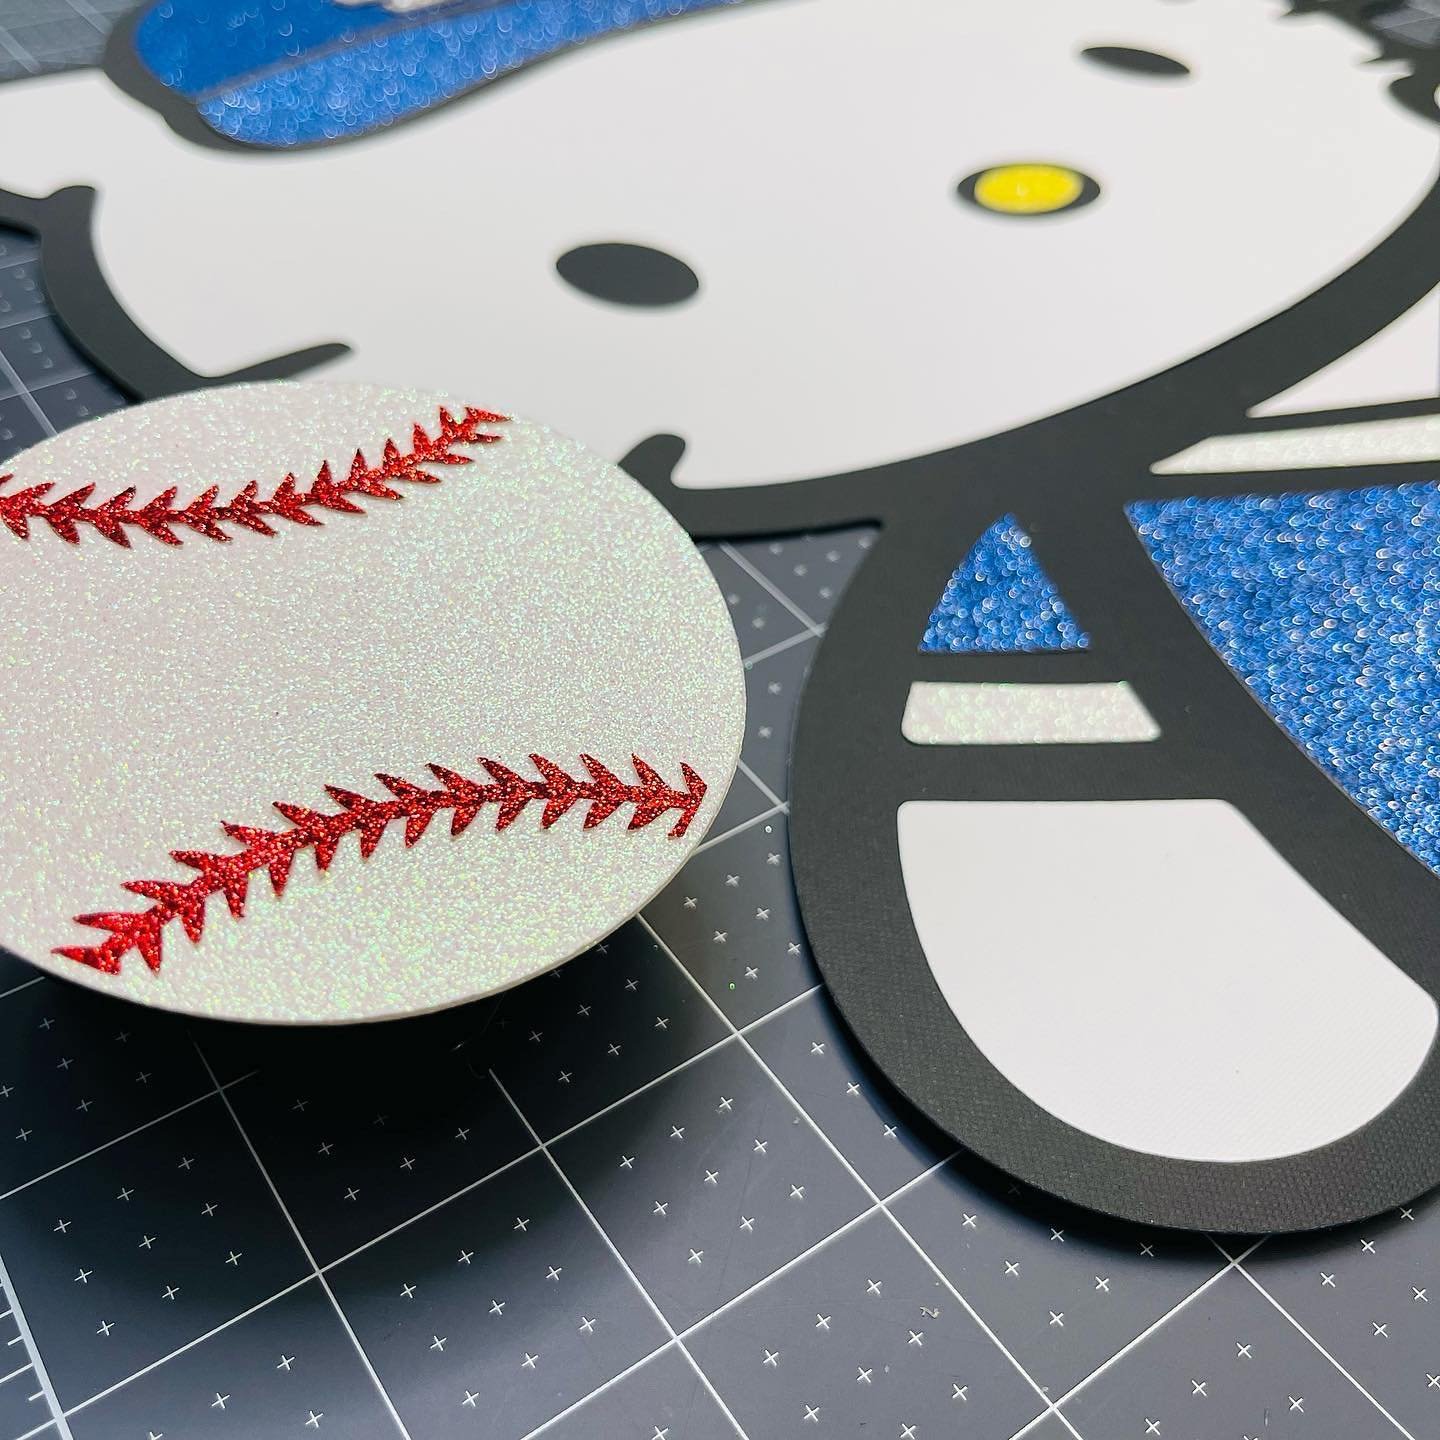 OFF THE MAT LA DODGERS HELLO KITTY — The Useless Crafter